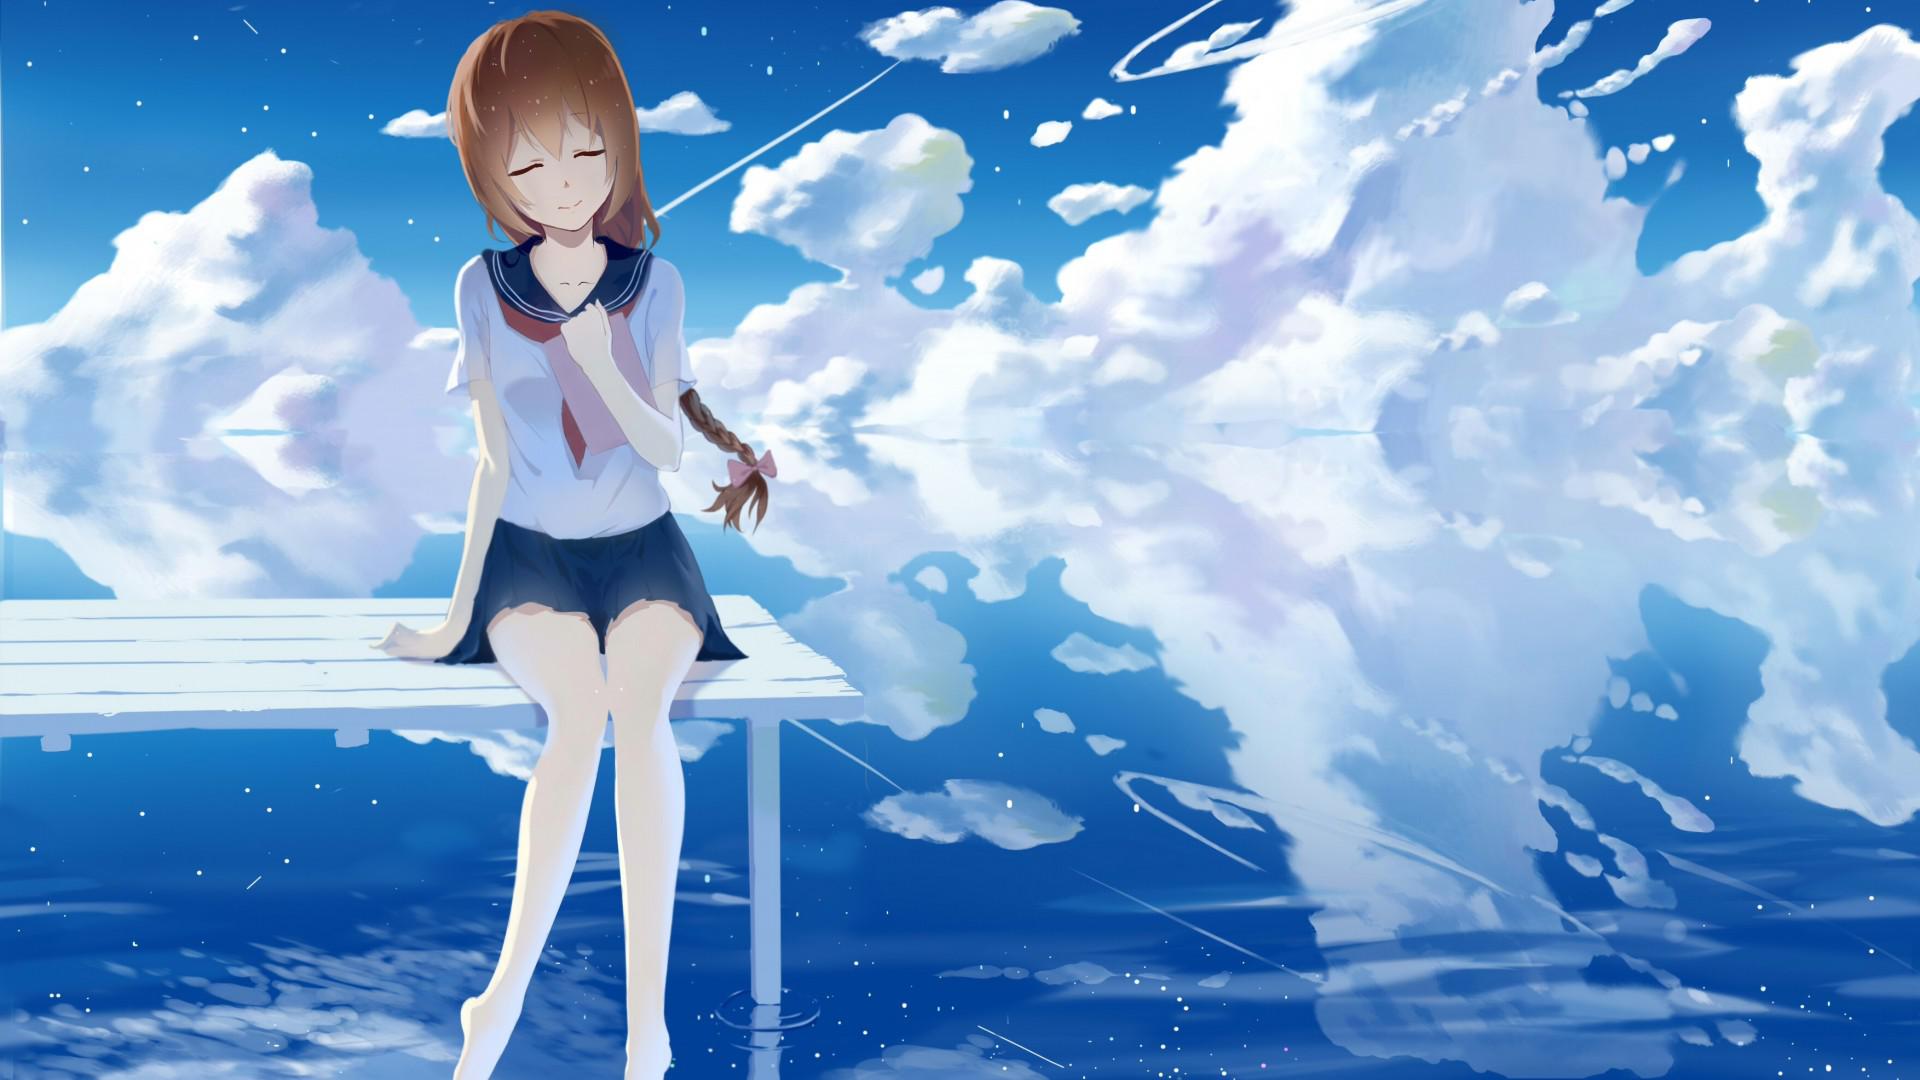 Poetry and dream girl, good-looking anime >> HD Wallpaper, get it now!